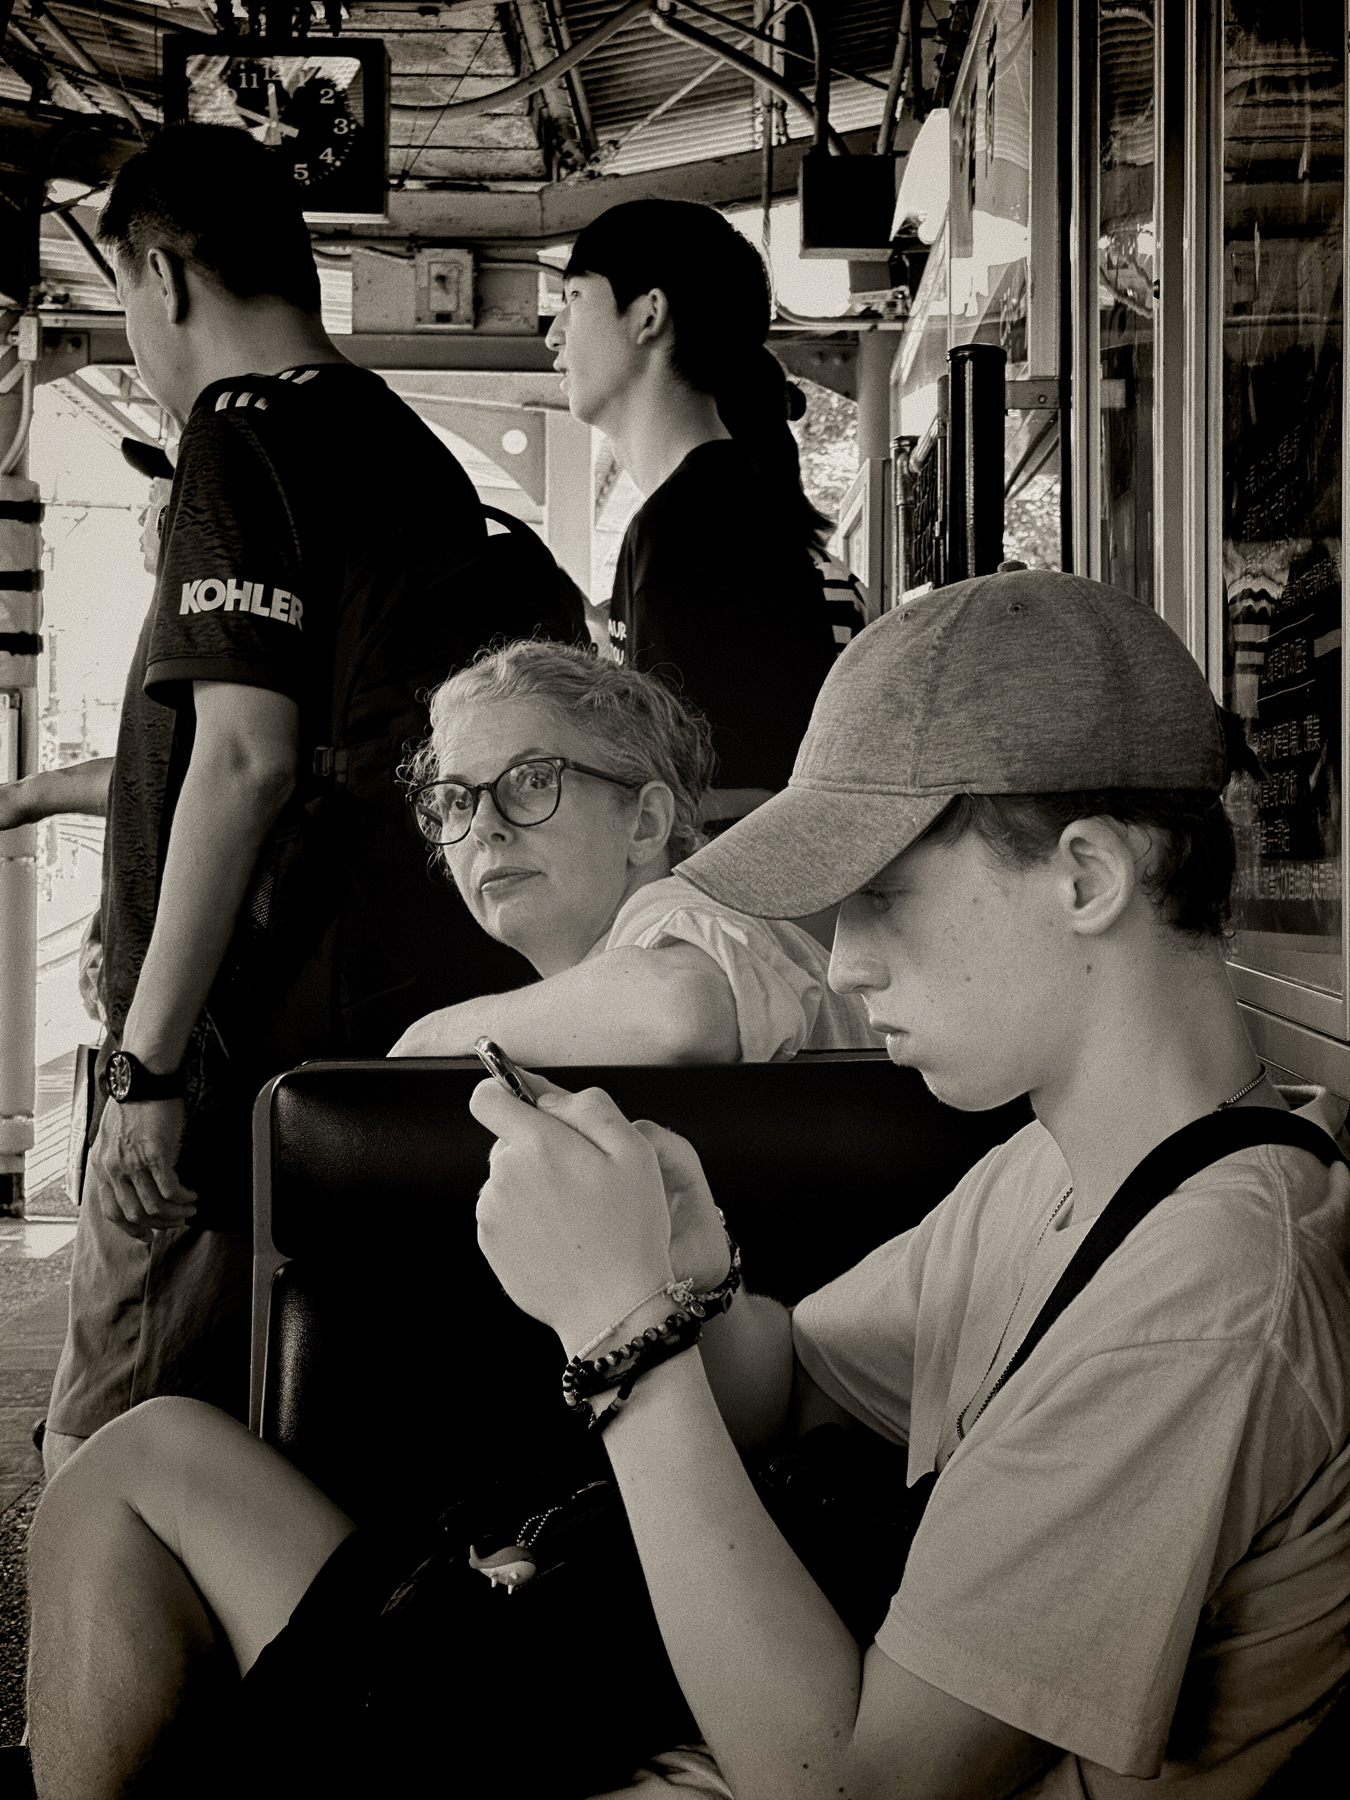 A black and white photo featuring my family waiting for the train a the ration. Other passengers stand nearby, facing away.